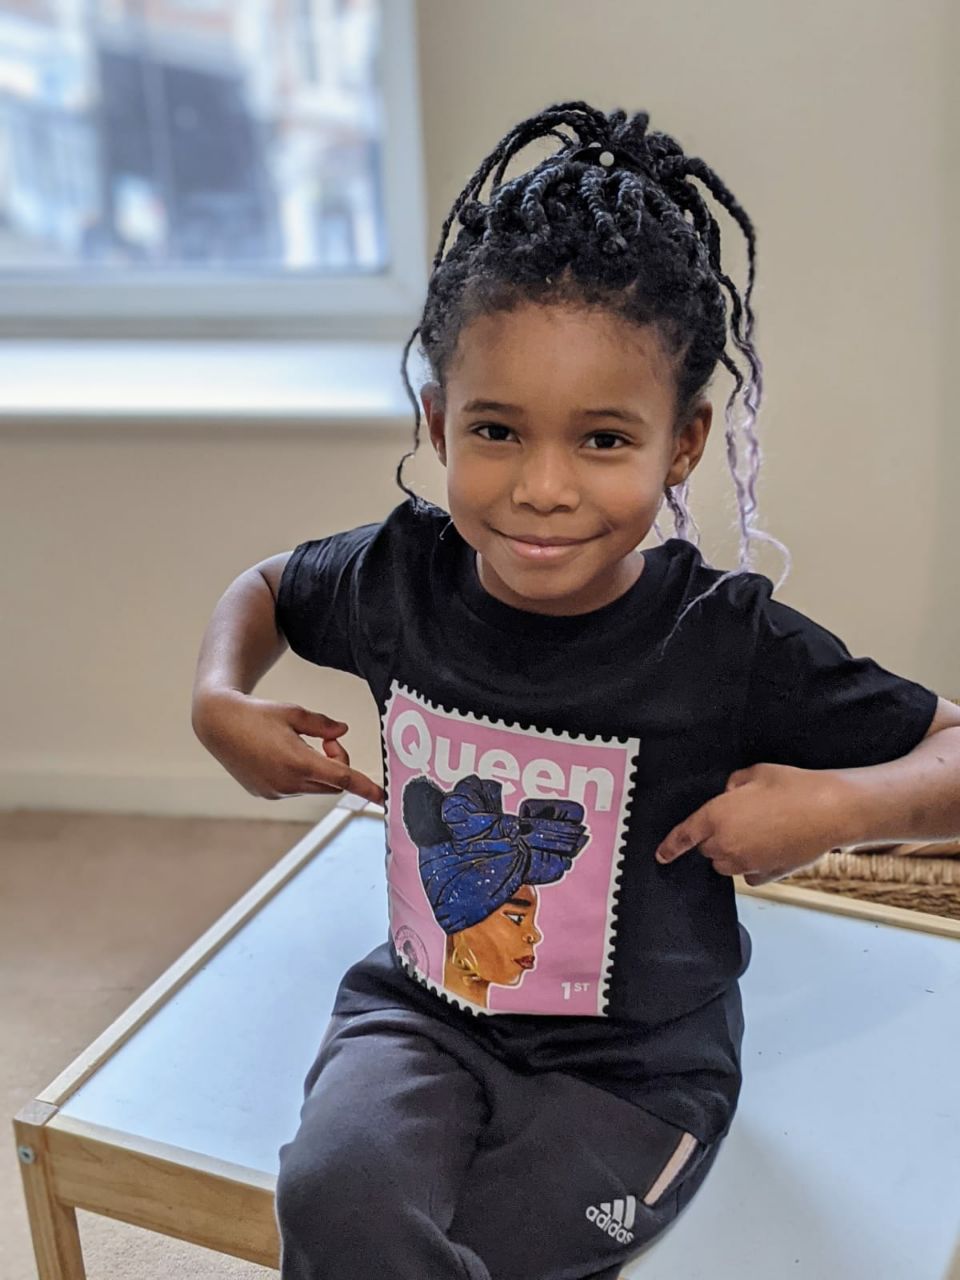 A girl wearing a t-shirt, with the depiction of a black queen on a stamp